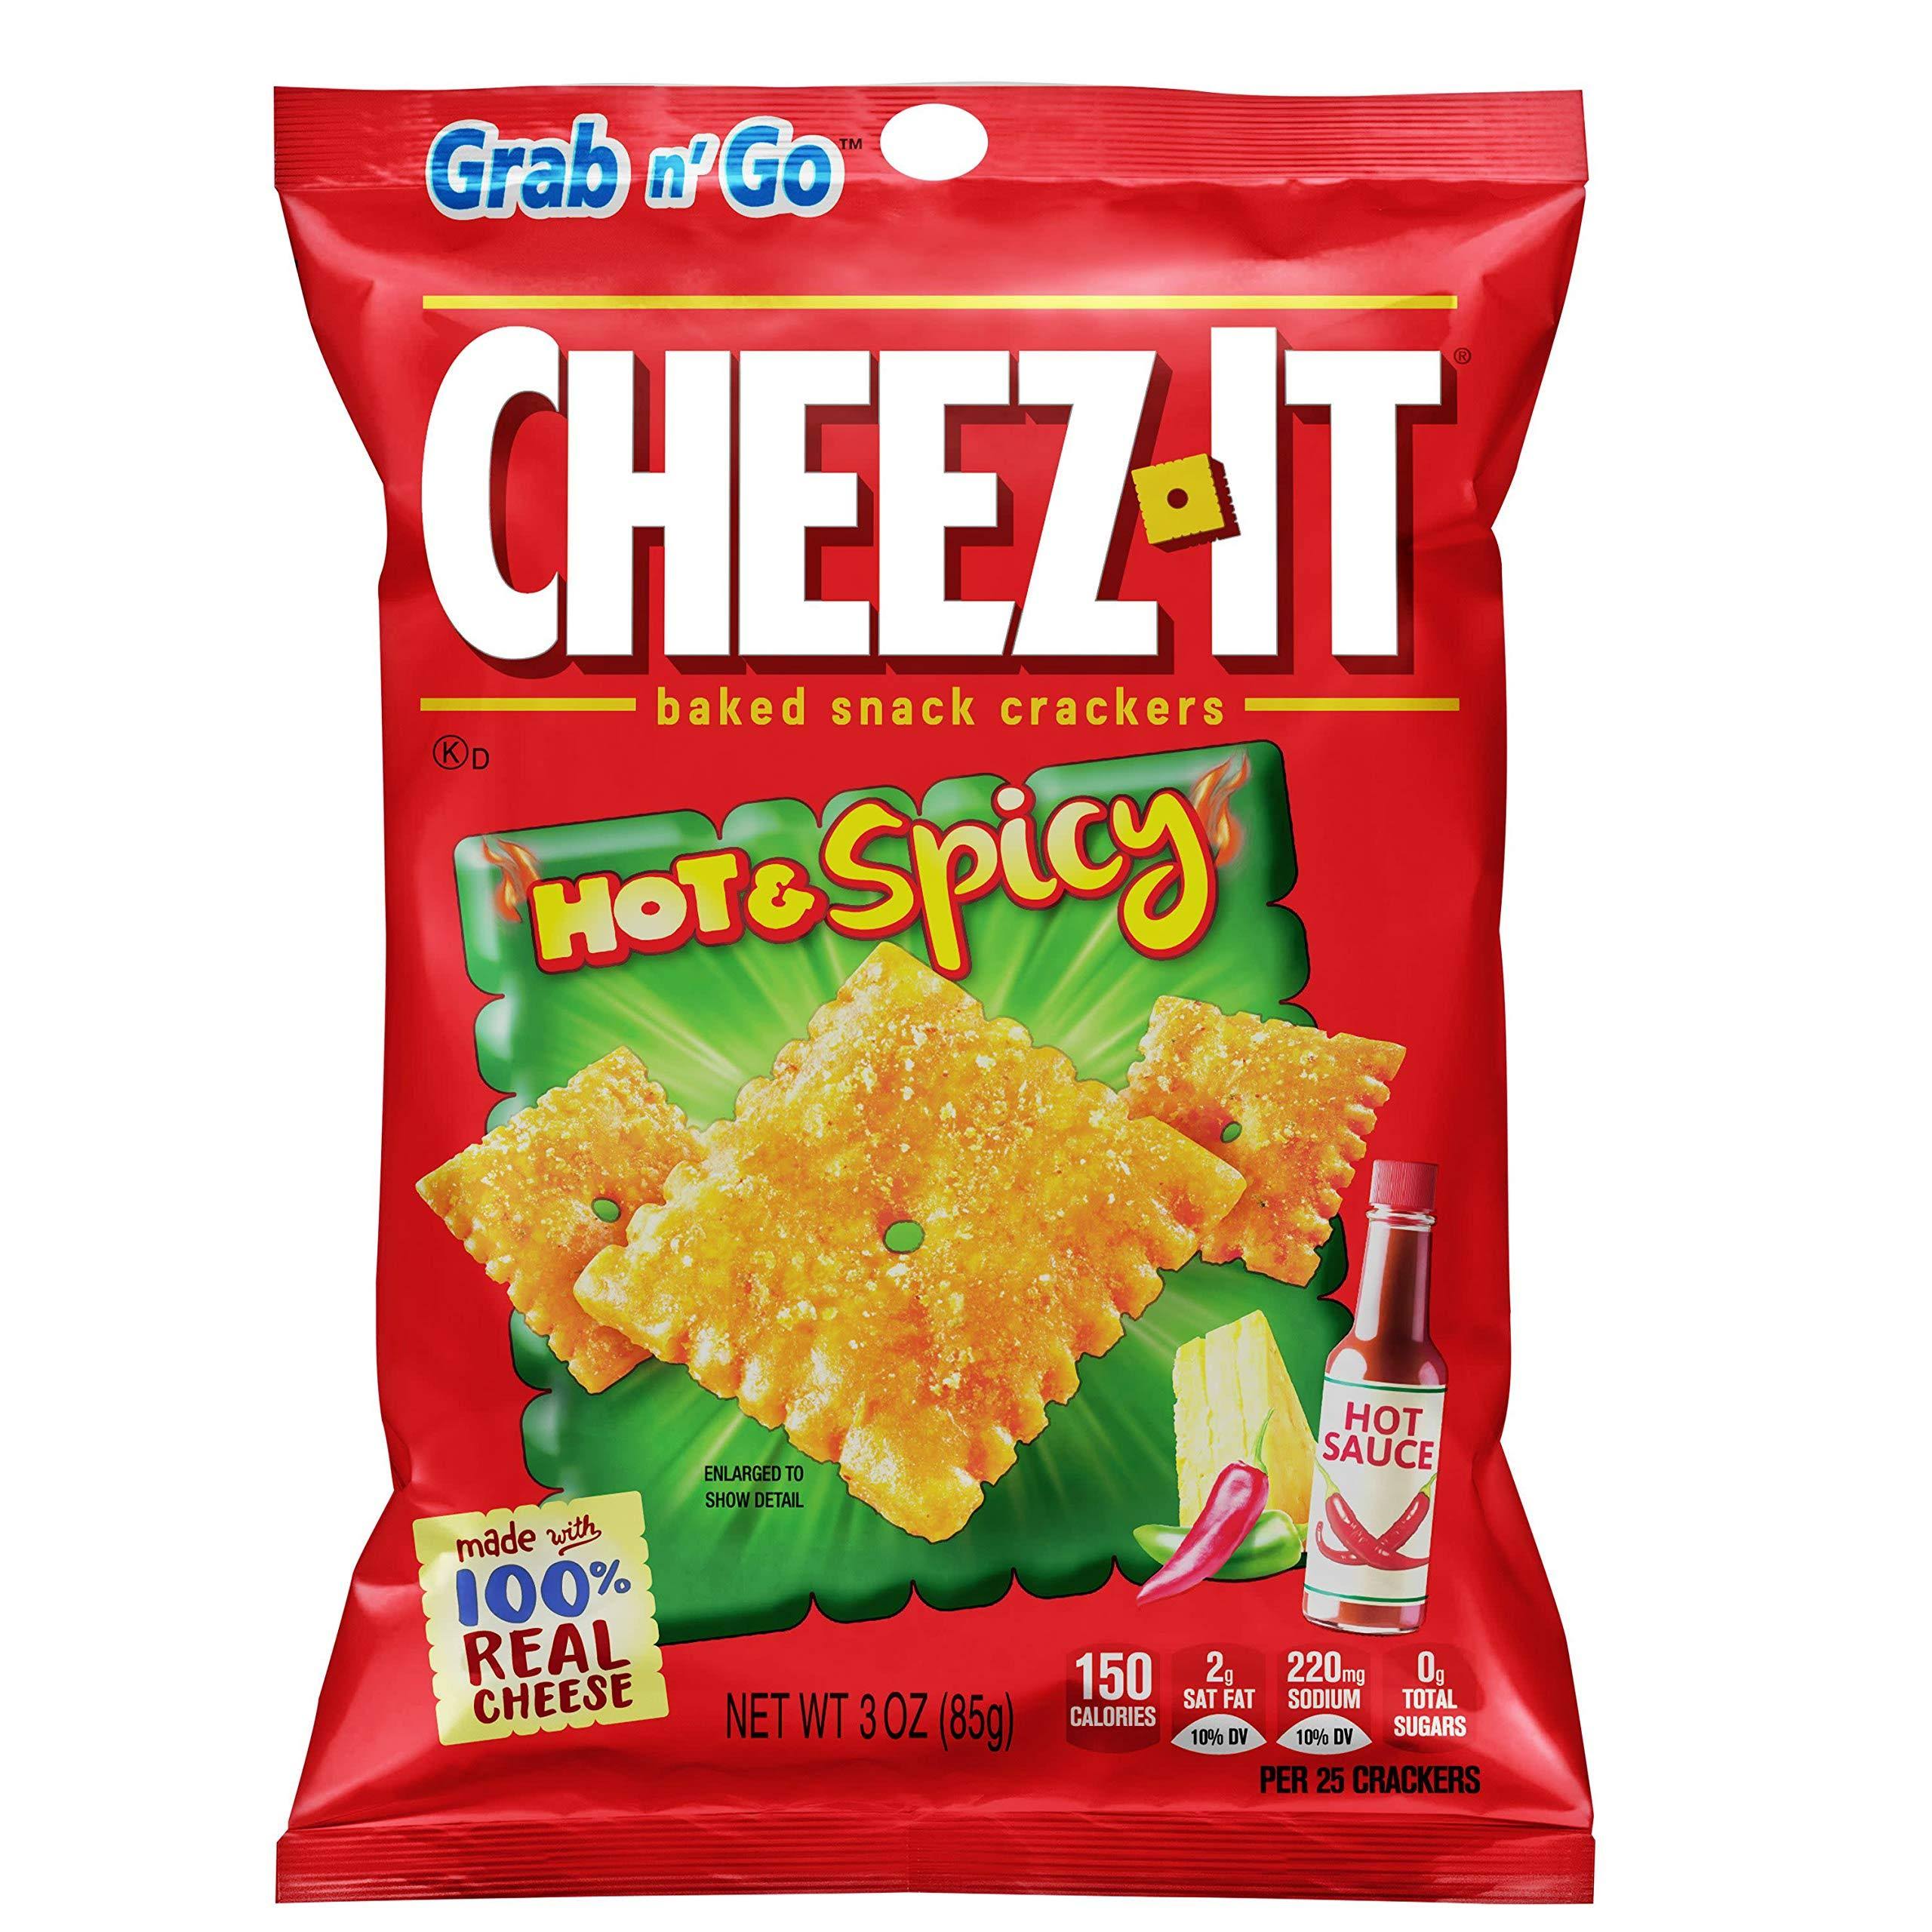 Cheez-It Grab n’ Go Baked Snack Crackers, Hot & Spicy - 3 oz